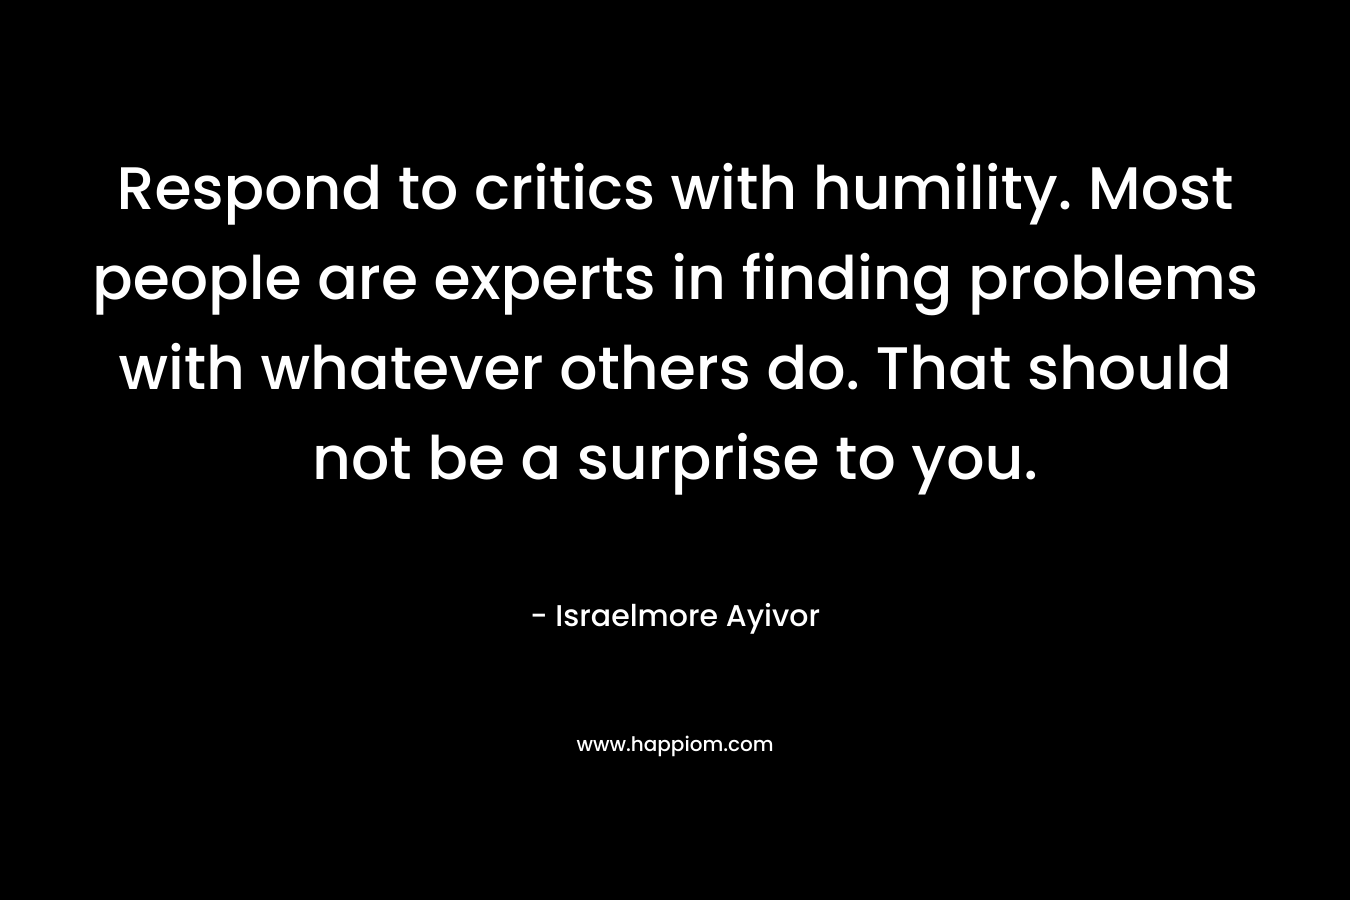 Respond to critics with humility. Most people are experts in finding problems with whatever others do. That should not be a surprise to you.